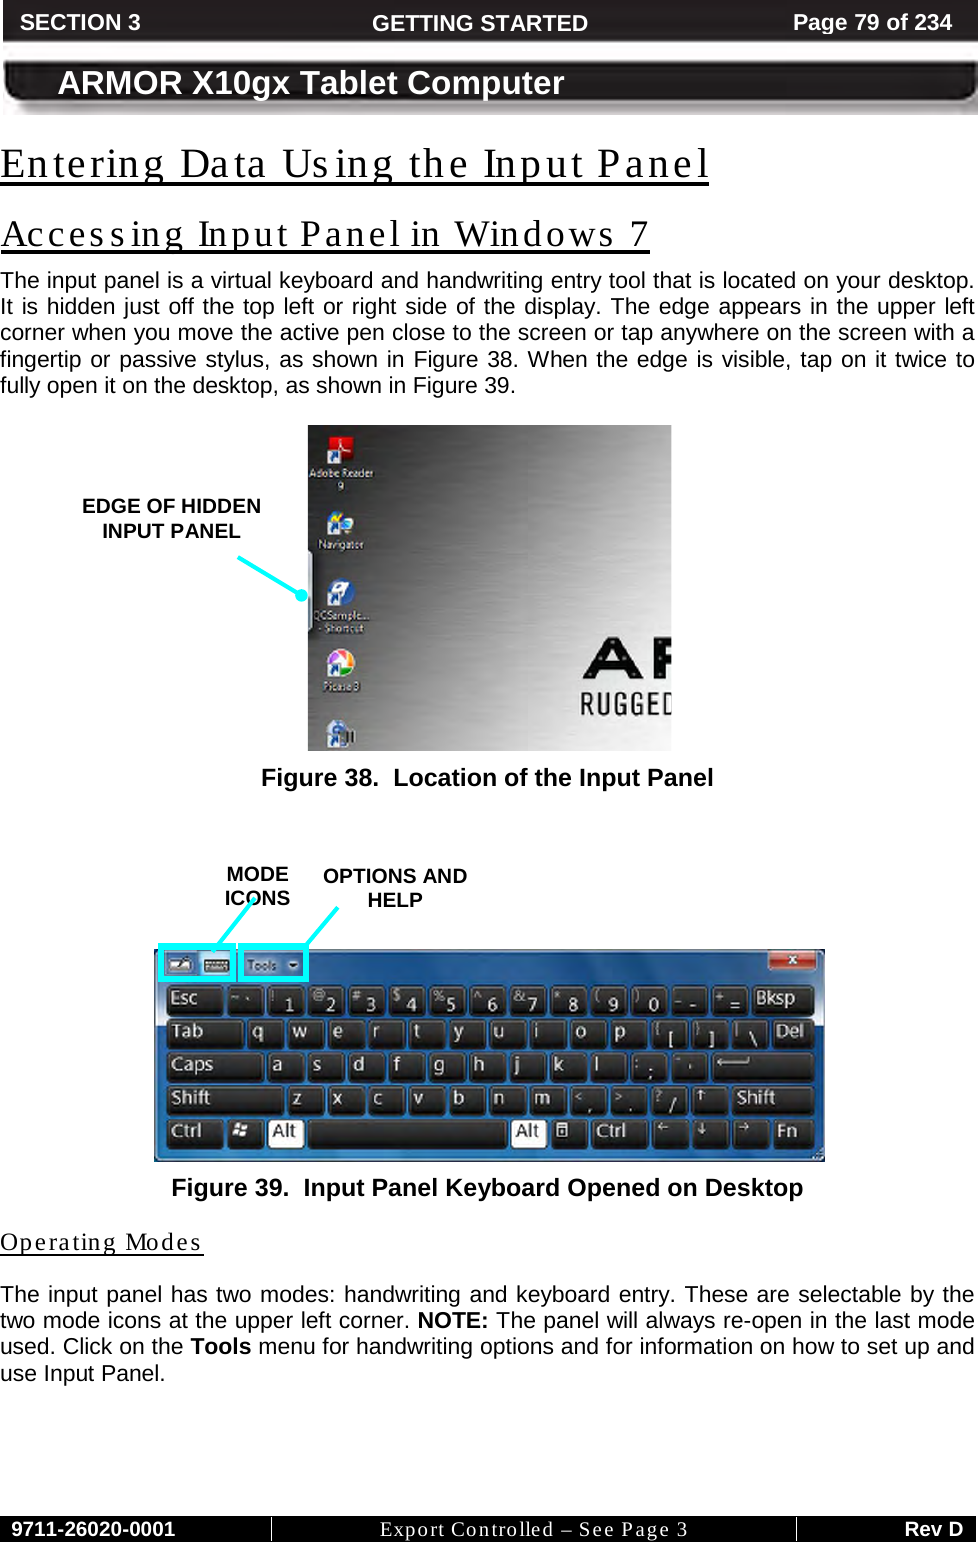     9711-26020-0001 Export Controlled – See Page 3 Rev D SECTION 3 GETTING STARTED Page 79 of 234  ARMOR X10gx Tablet Computer Entering Data Using the Input Panel The input panel is a virtual keyboard and handwriting entry tool that is located on your desktop. It is hidden just off the top left or right side of the display. The edge appears in the upper left corner when you move the active pen close to the screen or tap anywhere on the screen with a fingertip or passive stylus, as shown in Accessing Input Panel in Windows 7 Figure 38. When the edge is visible, tap on it twice to fully open it on the desktop, as shown in Figure 39.    Figure 38.  Location of the Input Panel        Figure 39.  Input Panel Keyboard Opened on Desktop The input panel has two modes: handwriting and keyboard entry. These are selectable by the two mode icons at the upper left corner. NOTE: The panel will always re-open in the last mode used. Click on the Tools menu for handwriting options and for information on how to set up and use Input Panel.   Operating Modes   MODE ICONS OPTIONS AND HELP EDGE OF HIDDEN INPUT PANEL  